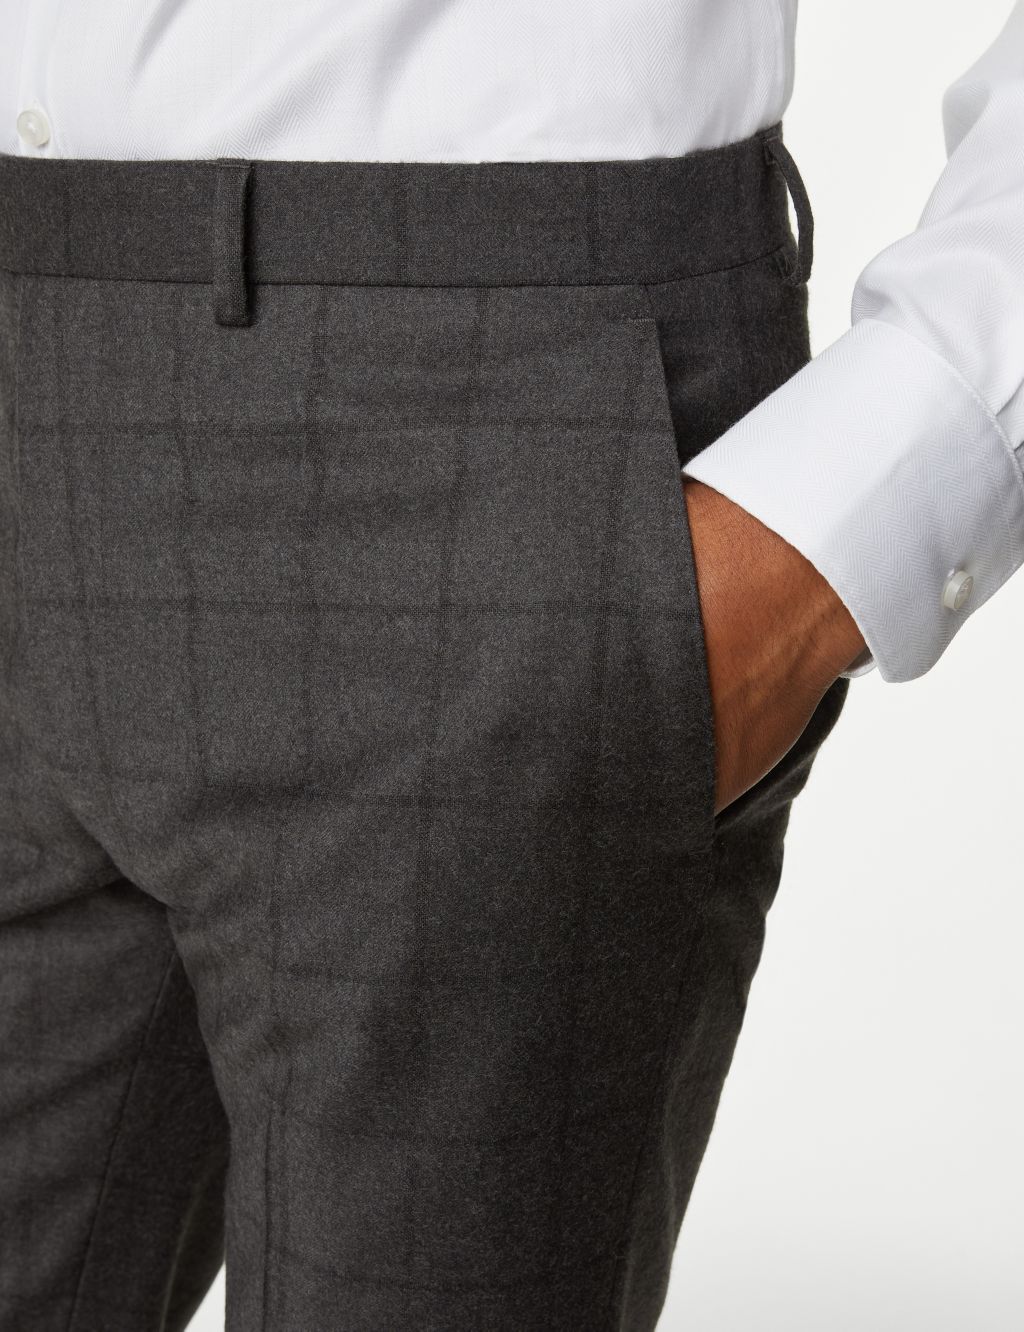 Slim Fit Pure Wool Check Suit Trousers image 3